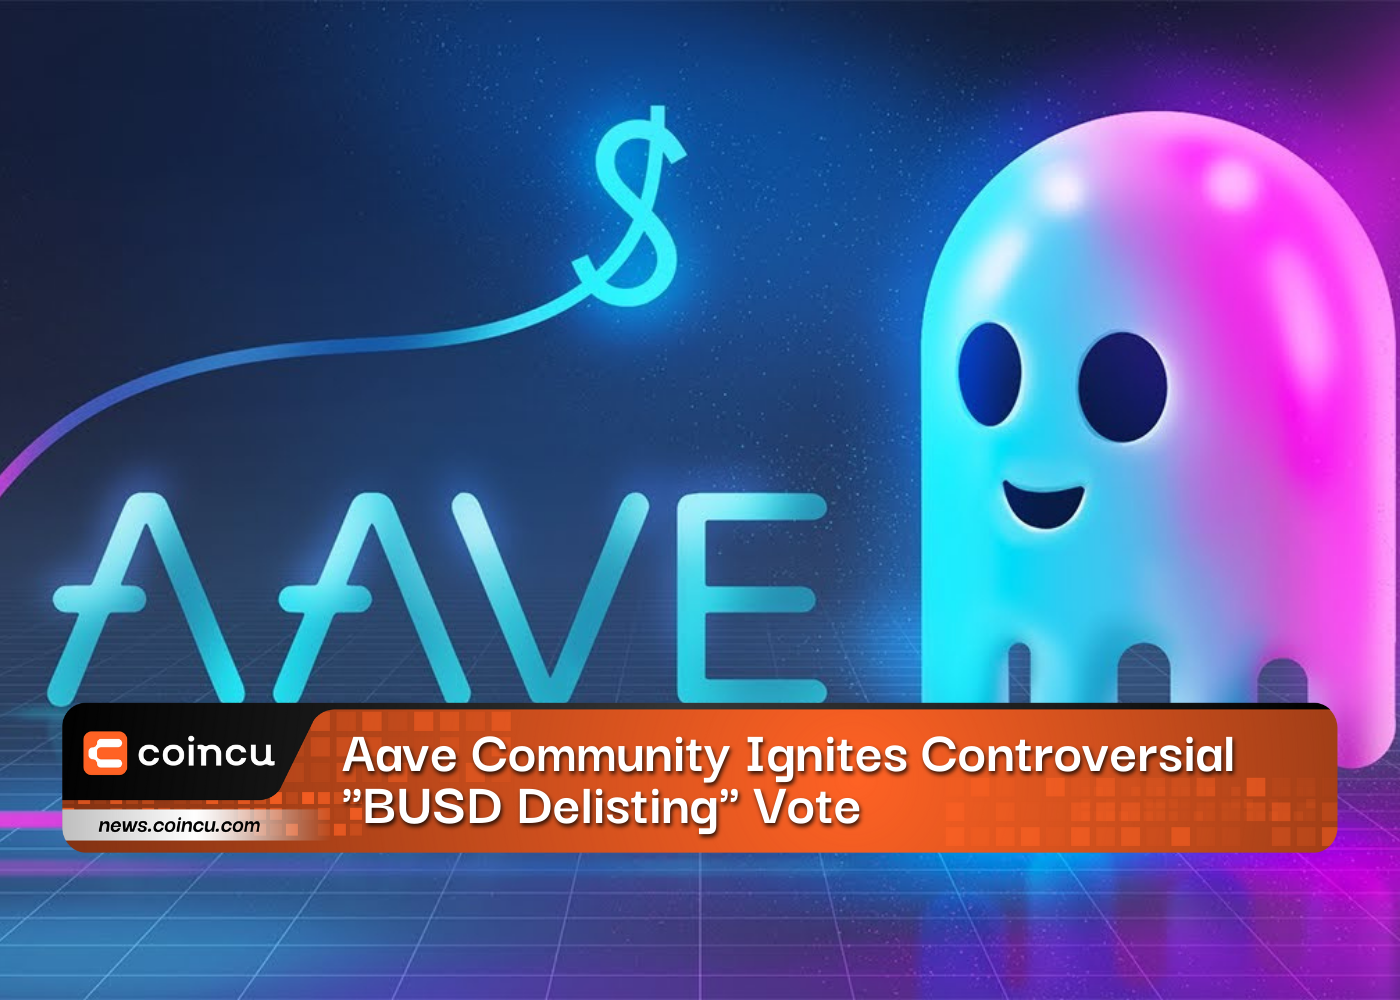 Aave Community Ignites Controversial